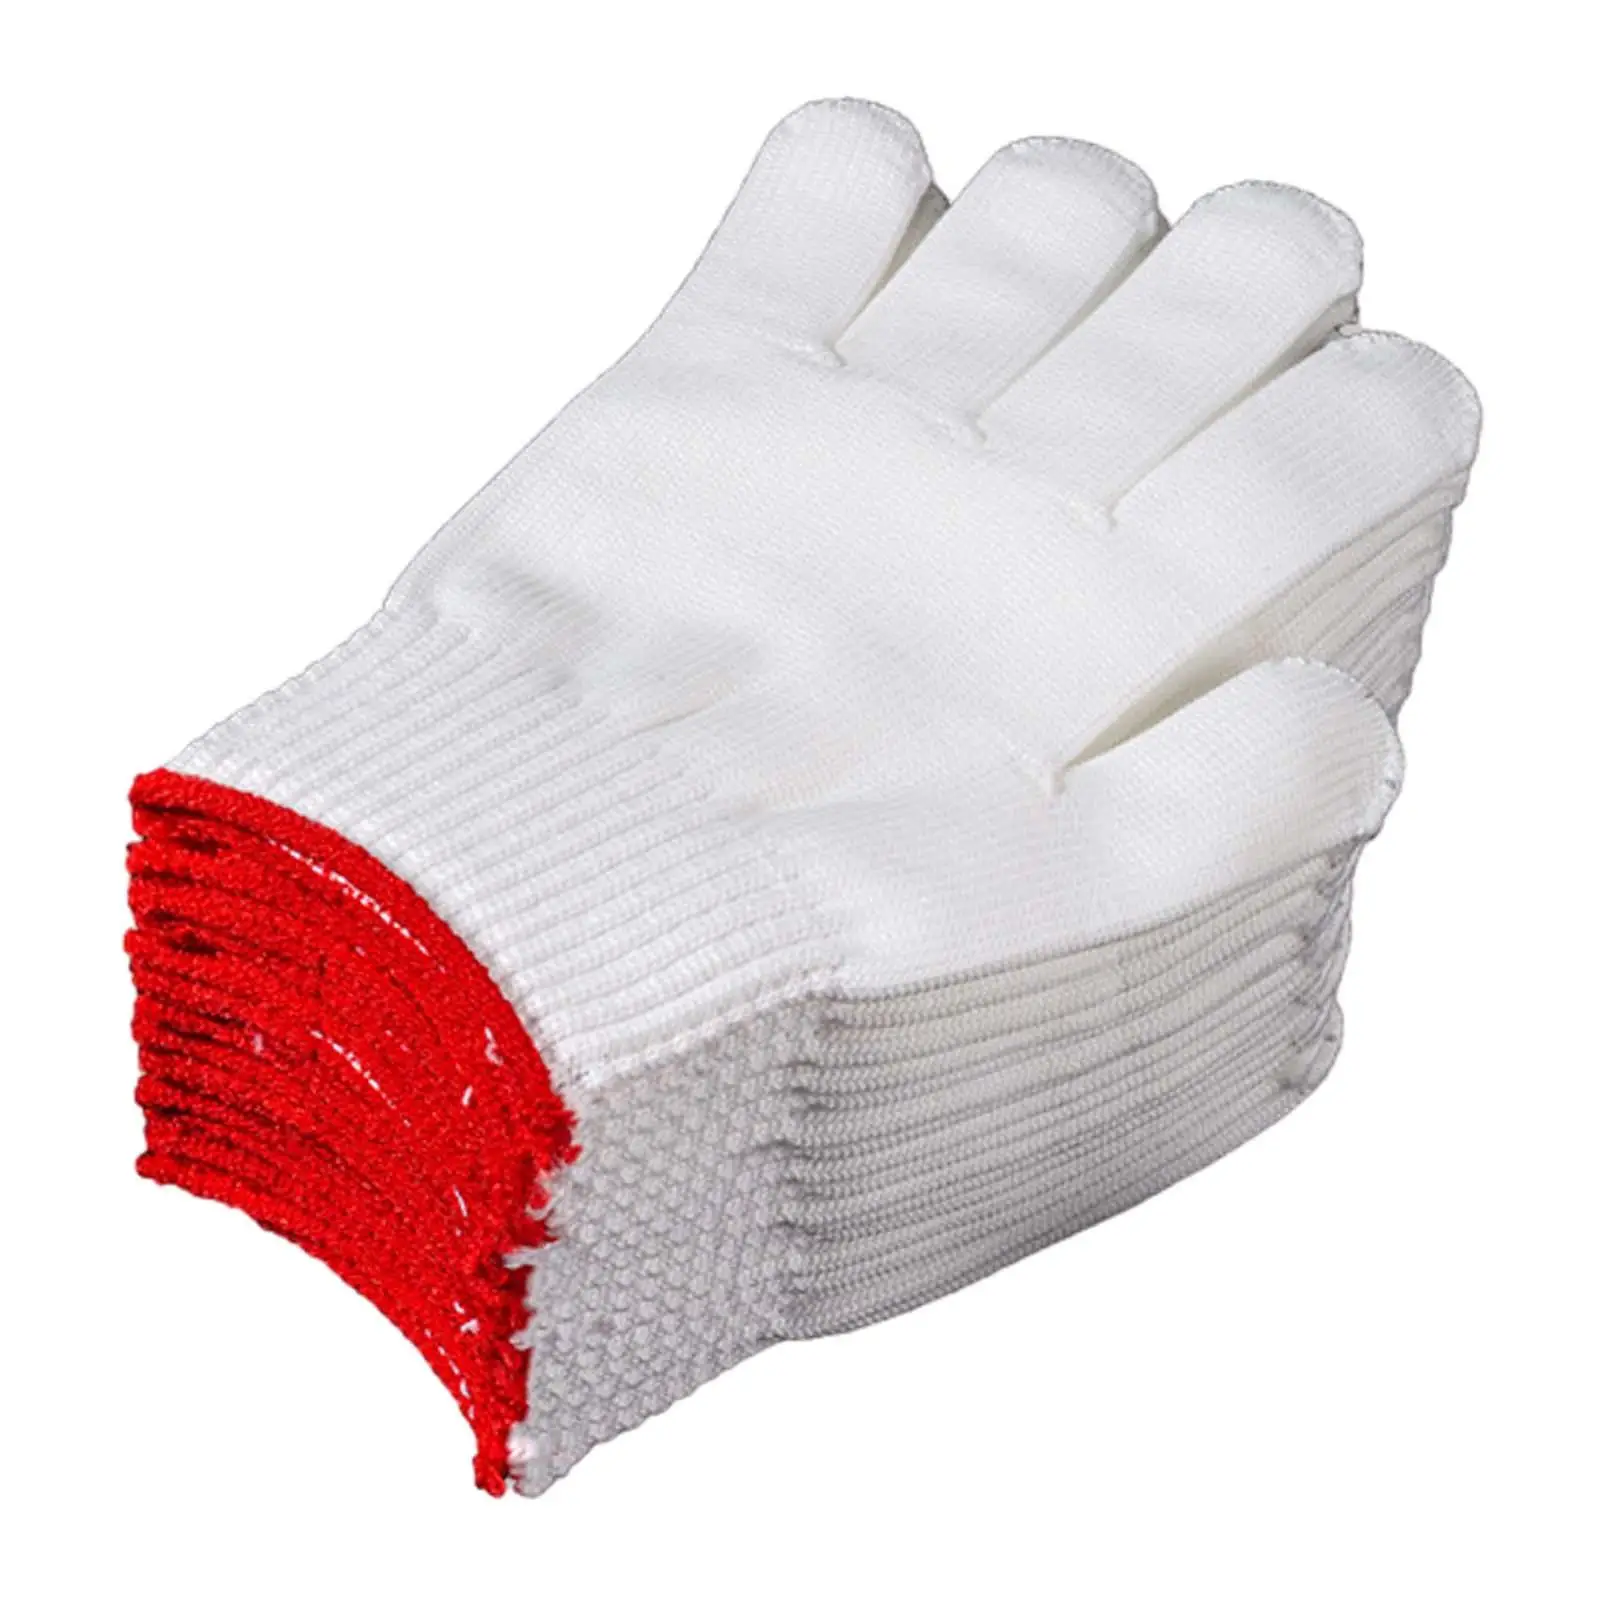 12 Pairs Work Gloves Cotton Labor Protection Gloves for Industrial Painting